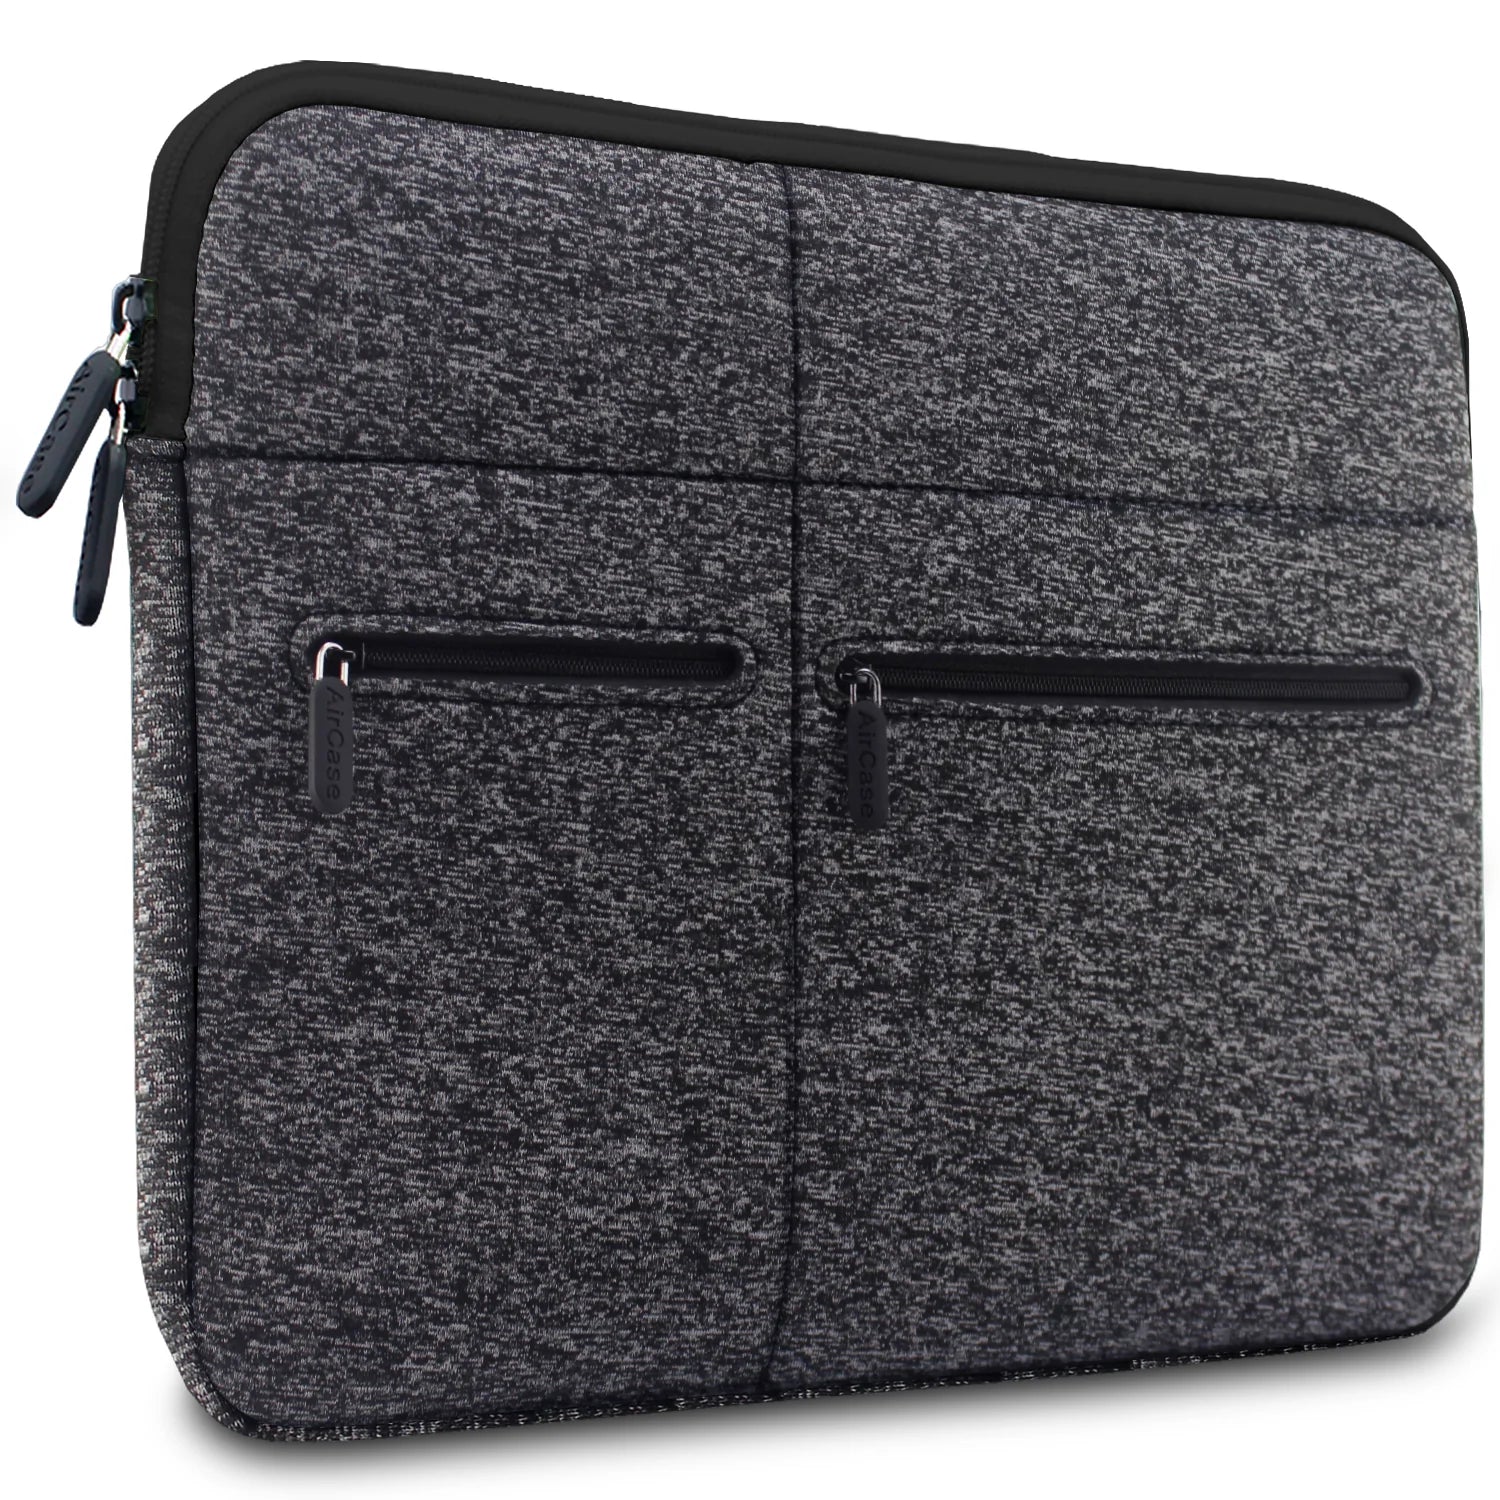 Extra Protective 6" Tablet / Kindle Sleeve with Pockets